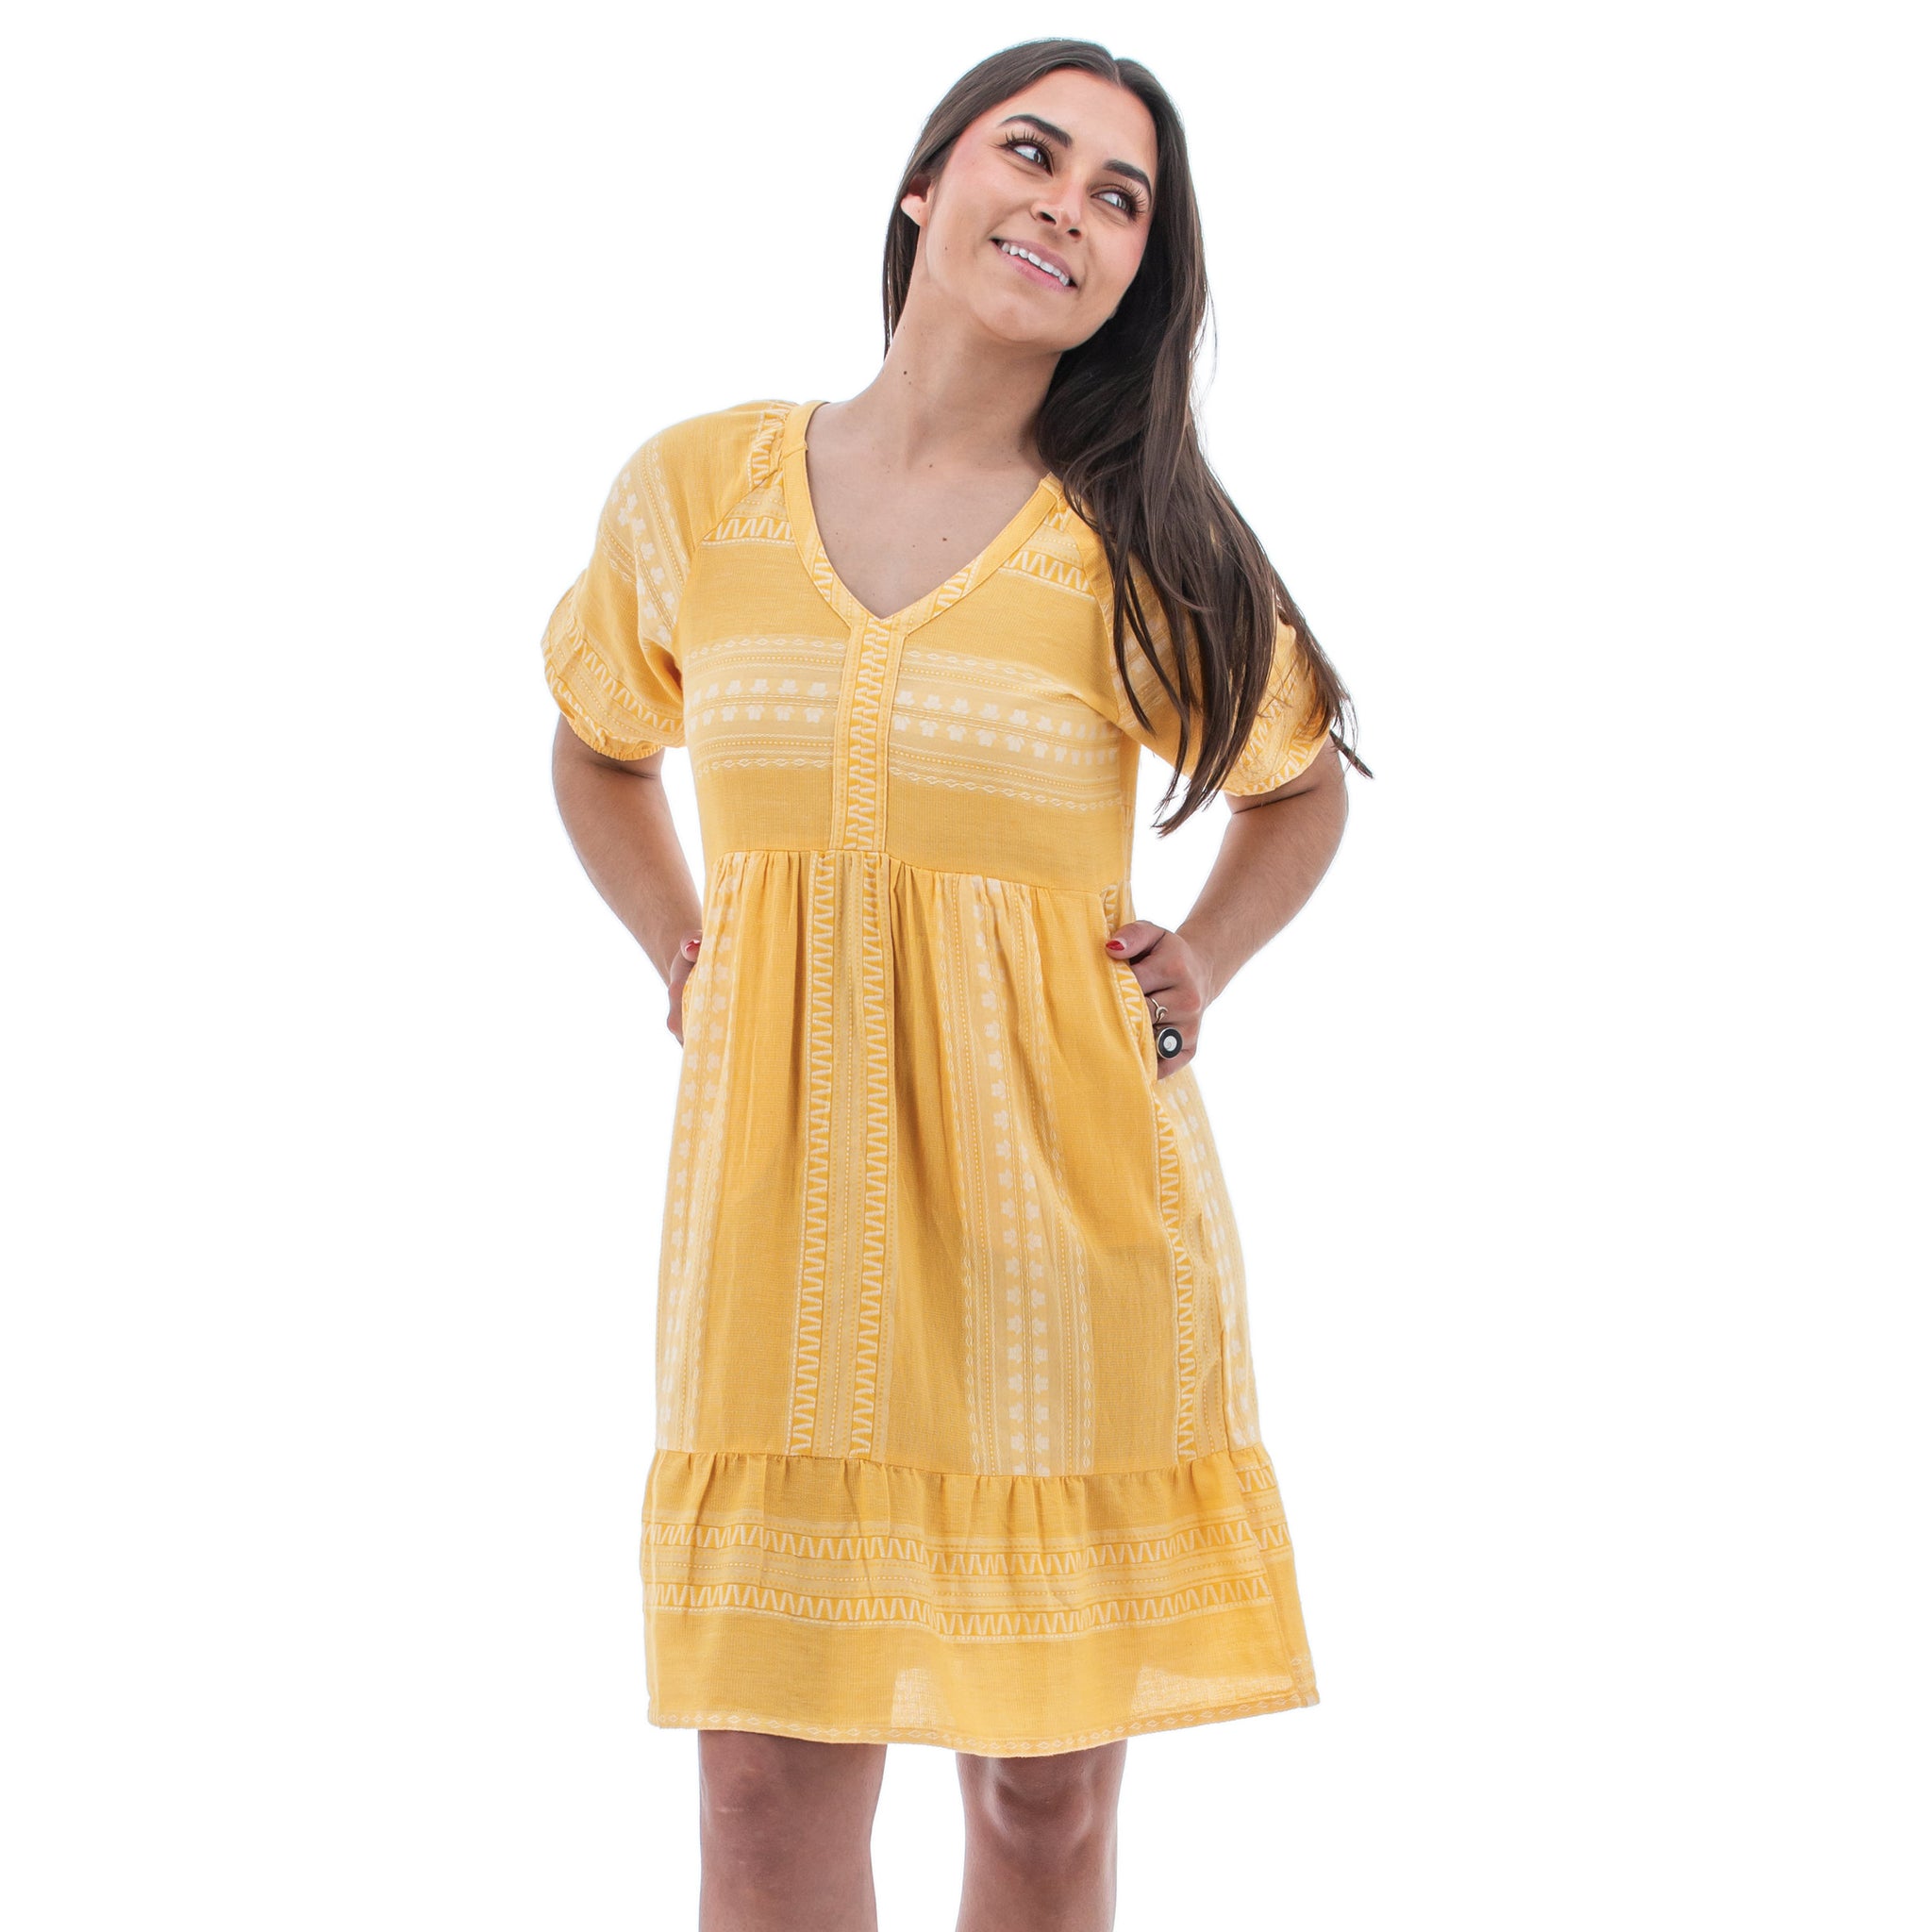 Aventura - Belmont Dress - all things being eco chilliwack canada - women's clothing and accessories store